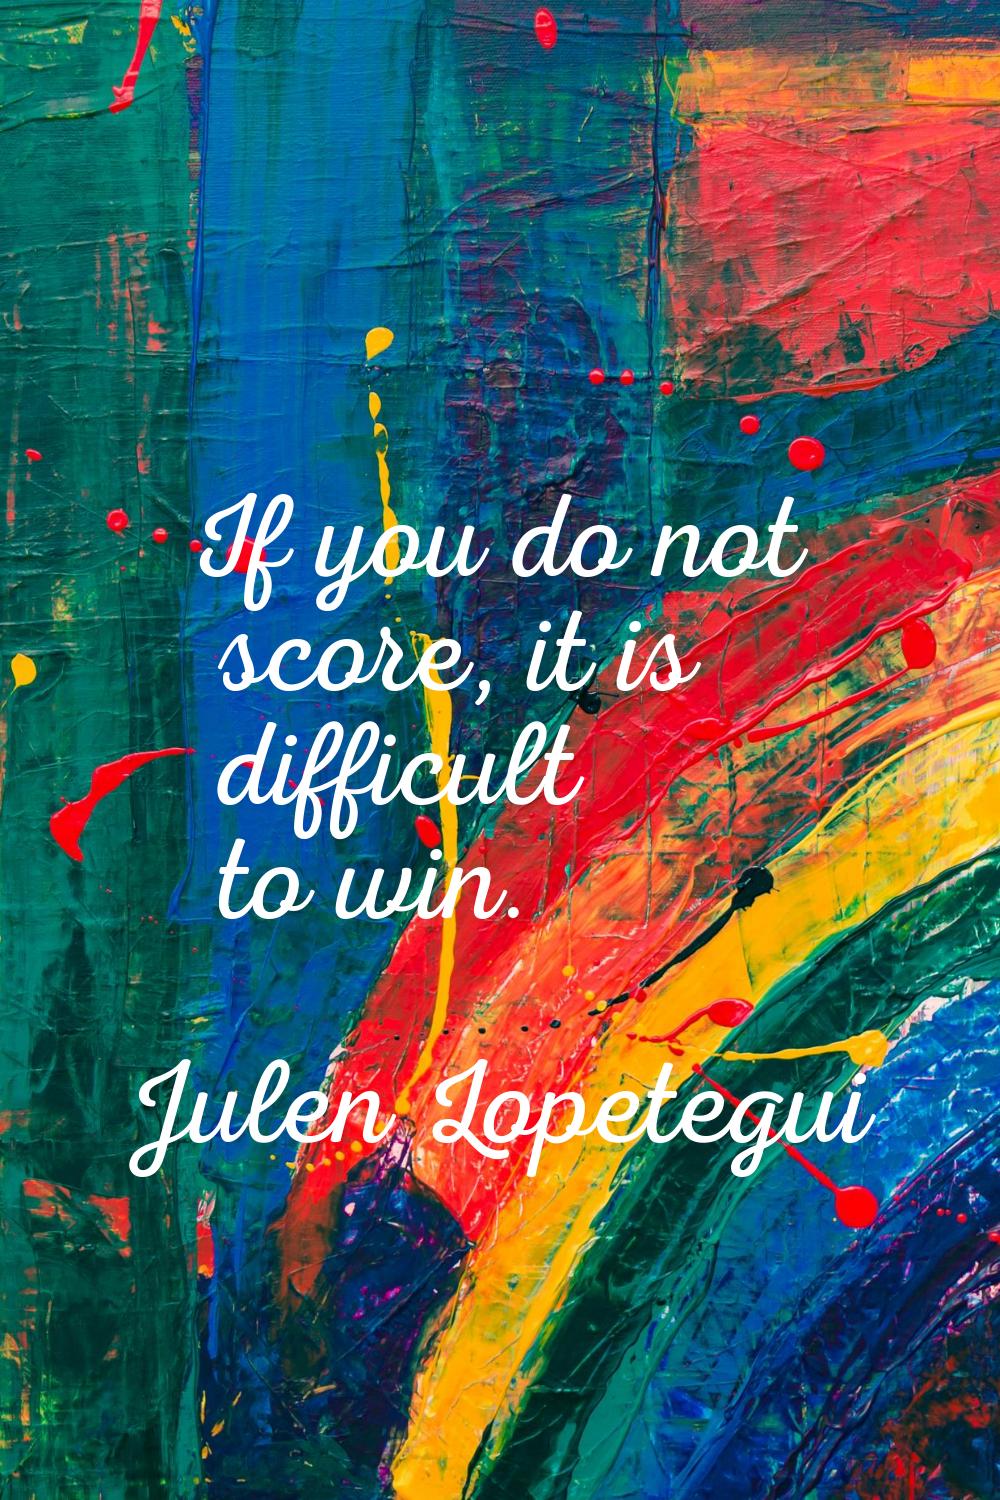 If you do not score, it is difficult to win.